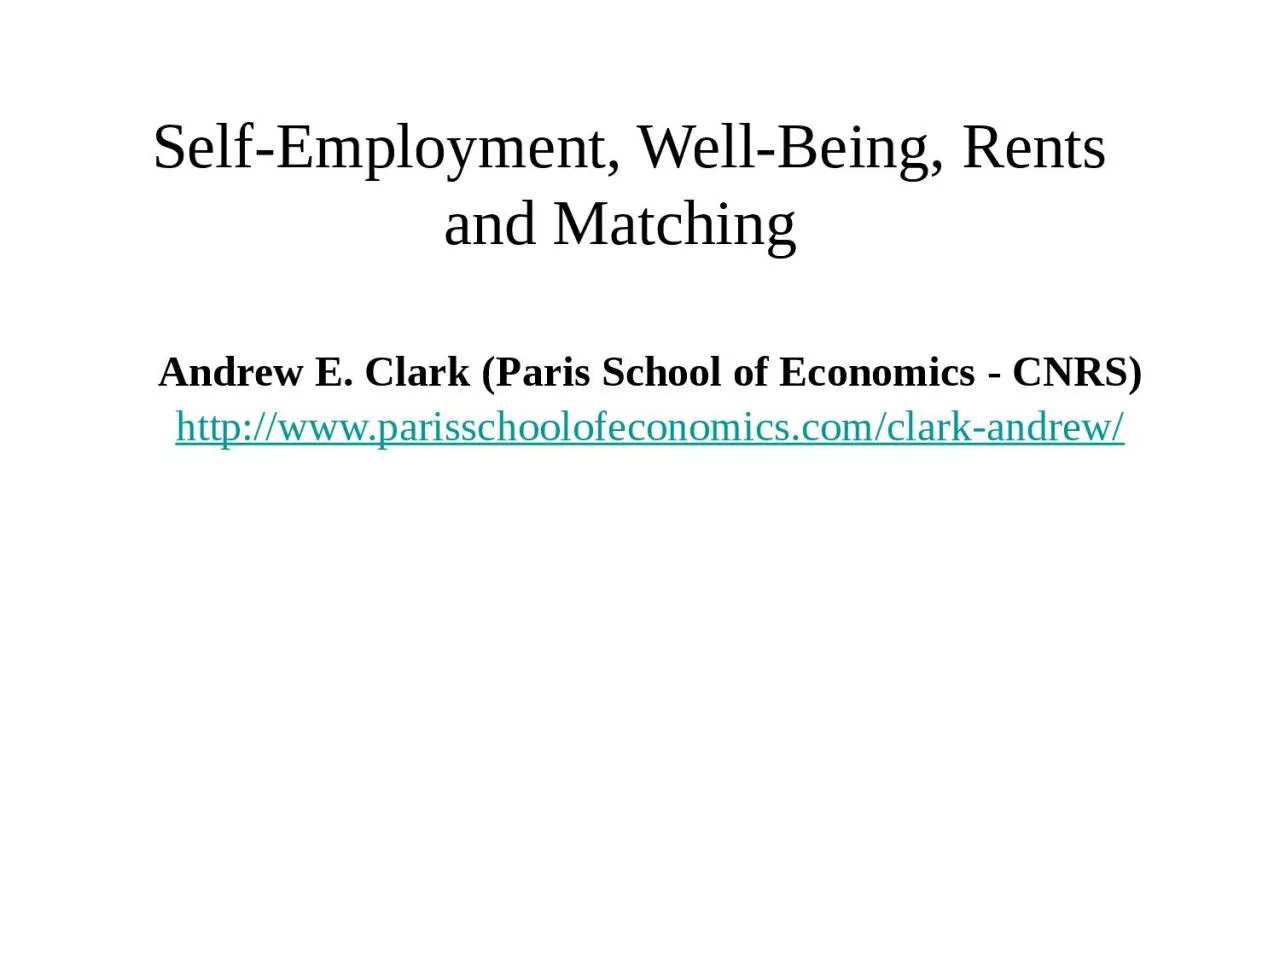 Self-Employment, Well-Being, Rents and Matching